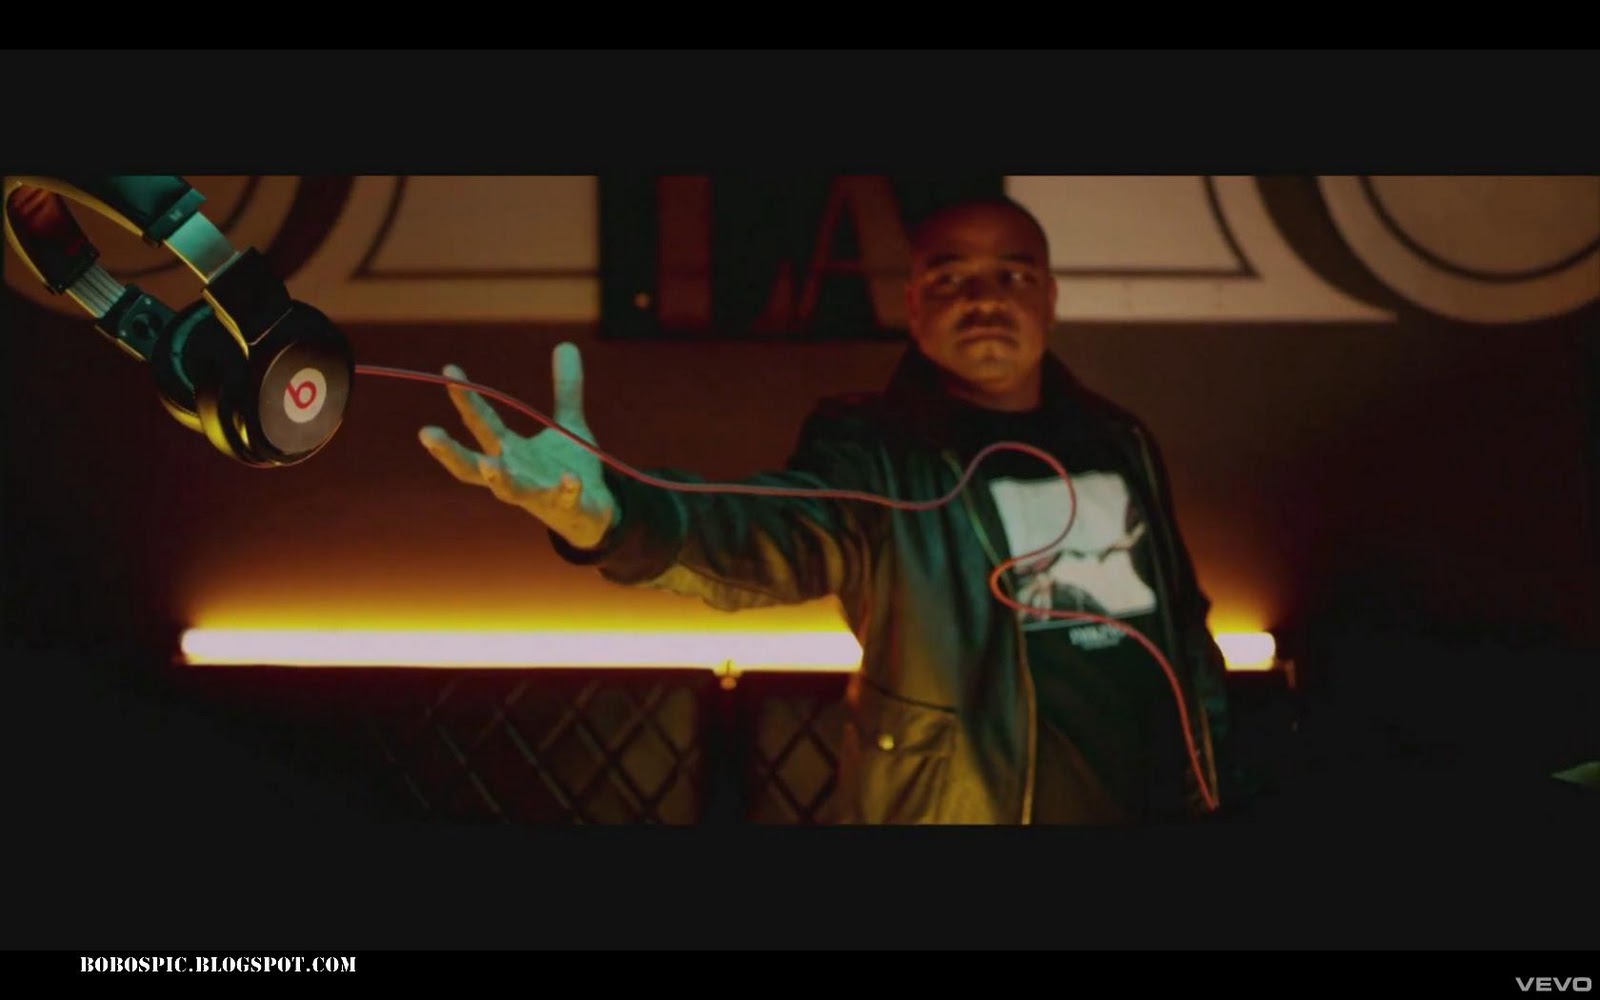 Music Video Pics: Dr. Dre - Kush ft. Snoop Dogg, Akon video pictures